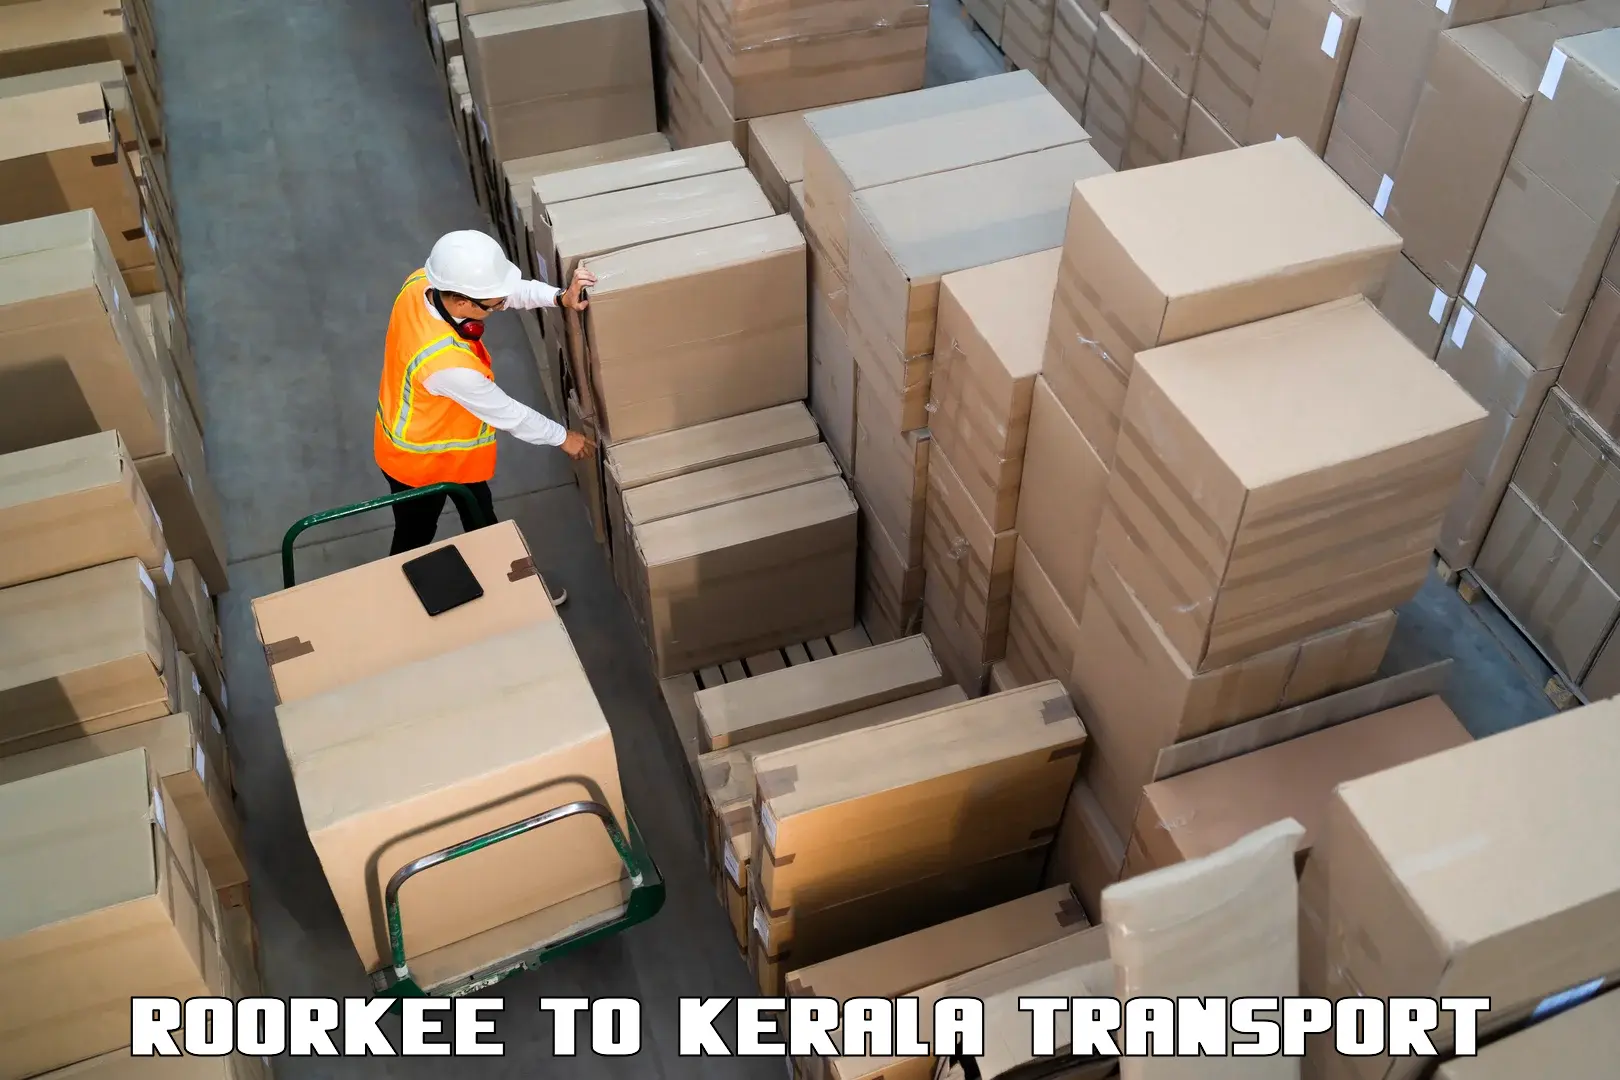 Daily parcel service transport Roorkee to Cochin Port Kochi